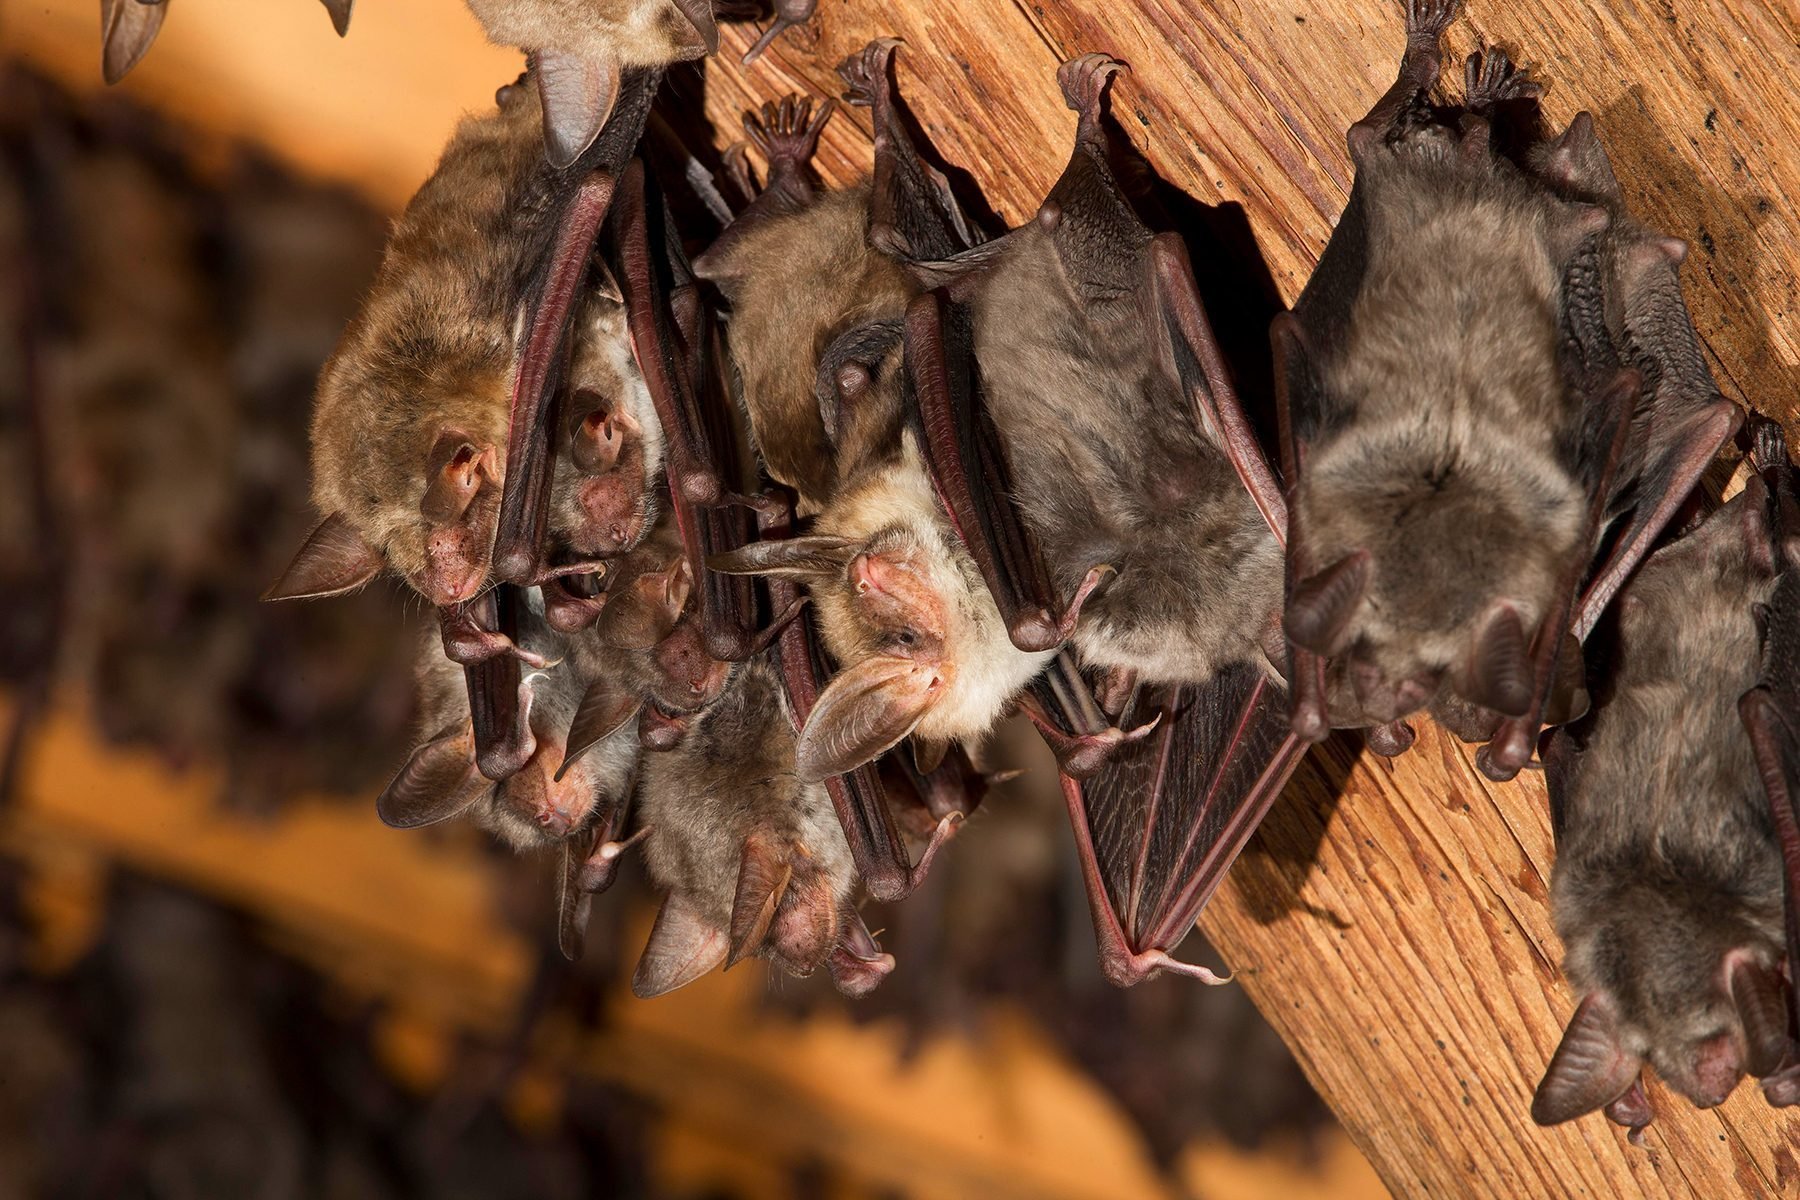 How To Get Rid of Bats in the Attic